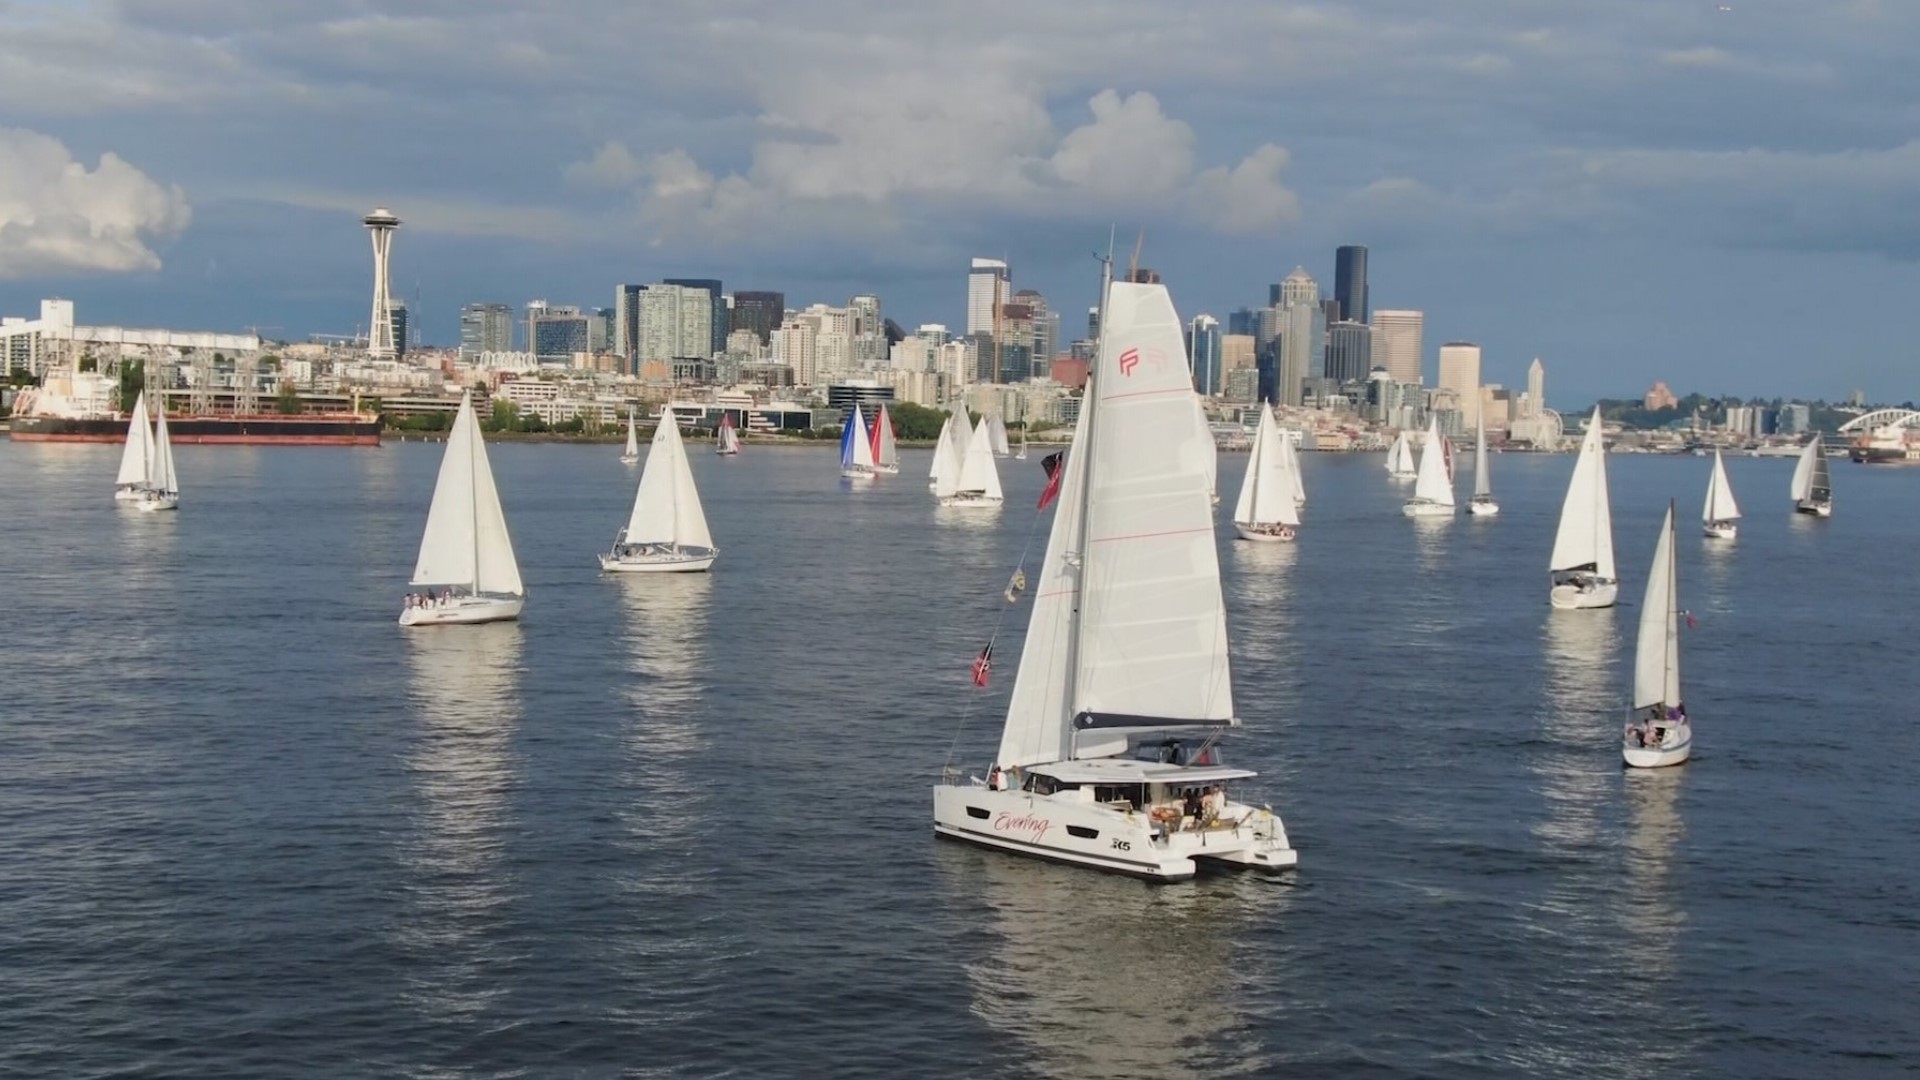 Even if you can't own a boat, there are plenty of ways to learn to sail and "anchor aweigh" in and around Seattle